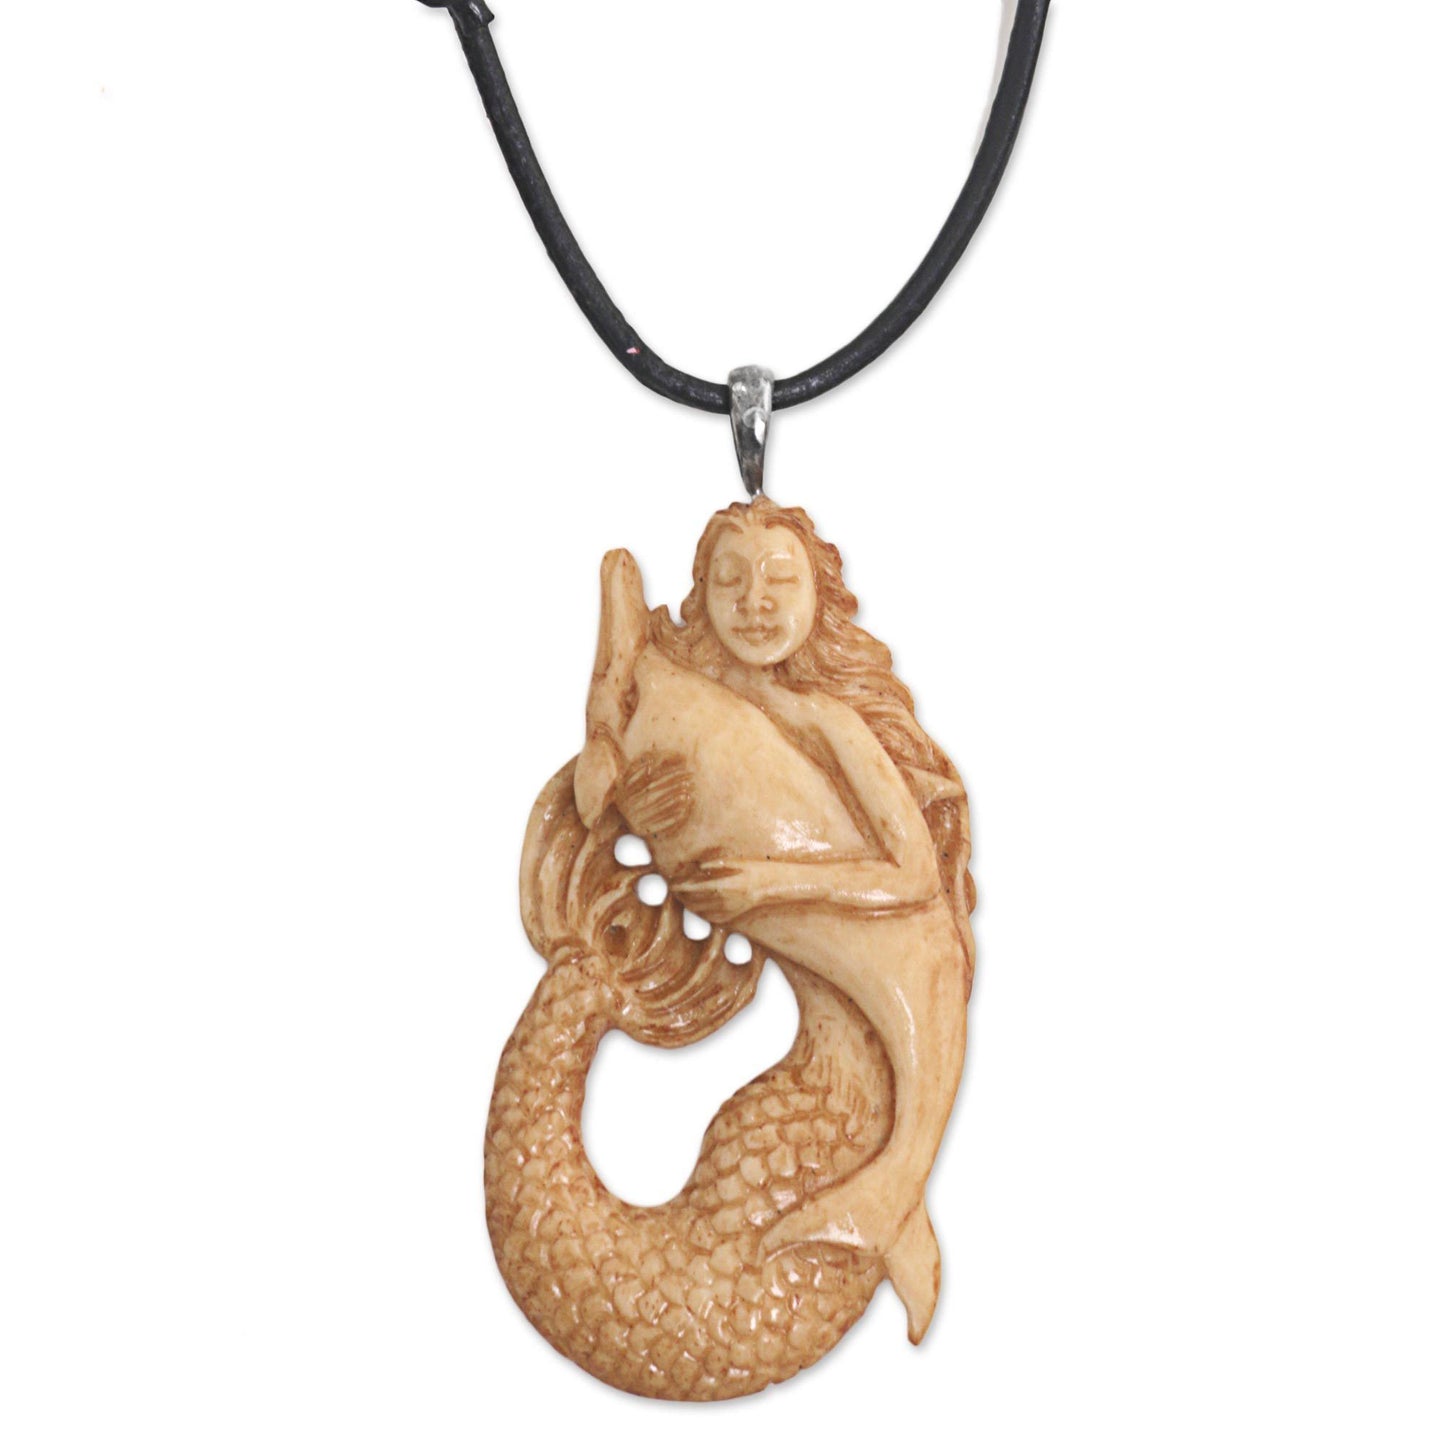 Mermaid & Dolphin Hand-Carved Pendant Necklace